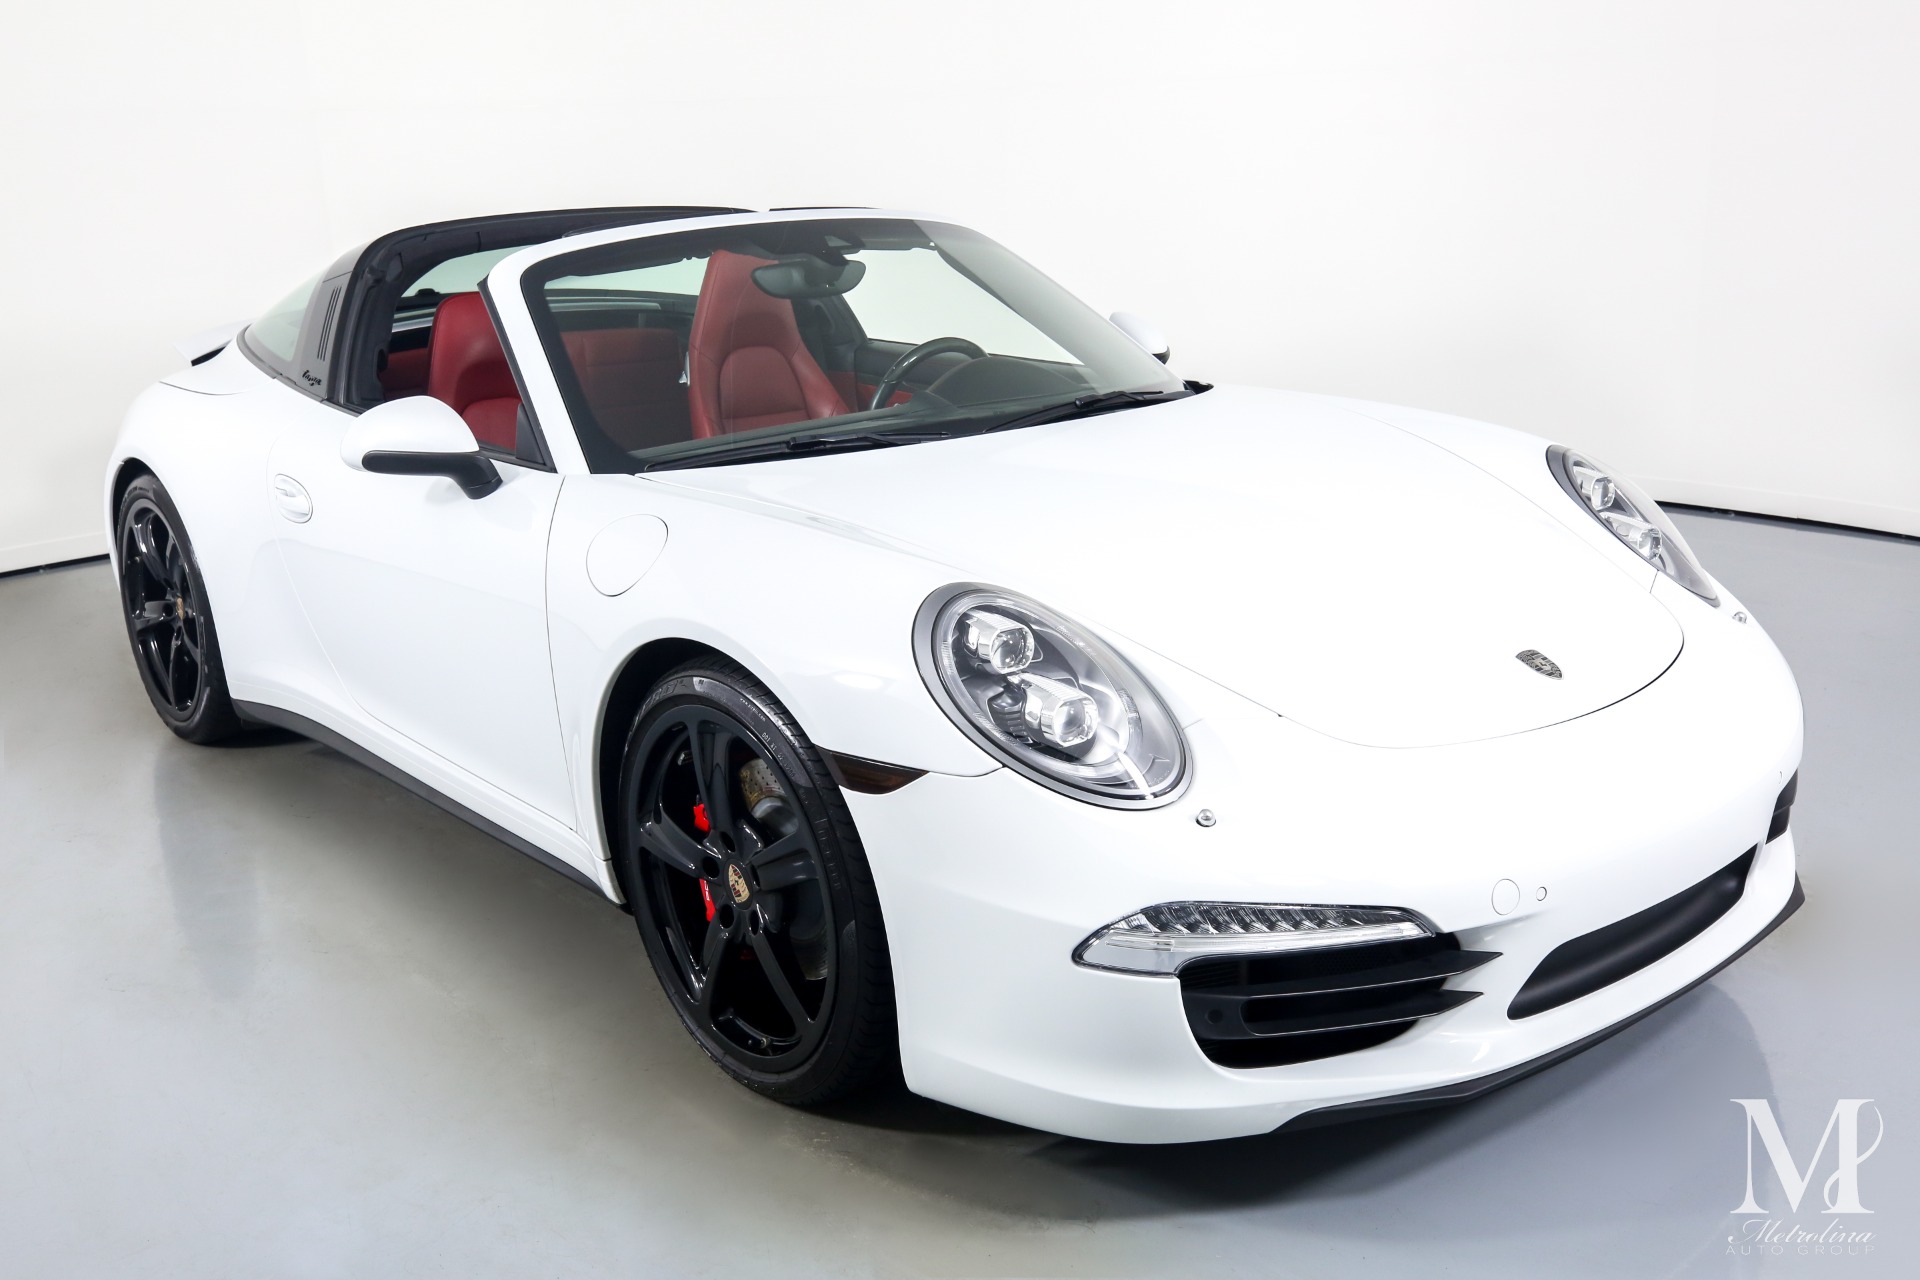 Used 2015 Porsche 911 Targa 4S for sale $112,375 at Metrolina Auto Group in Charlotte NC 28217 - 3